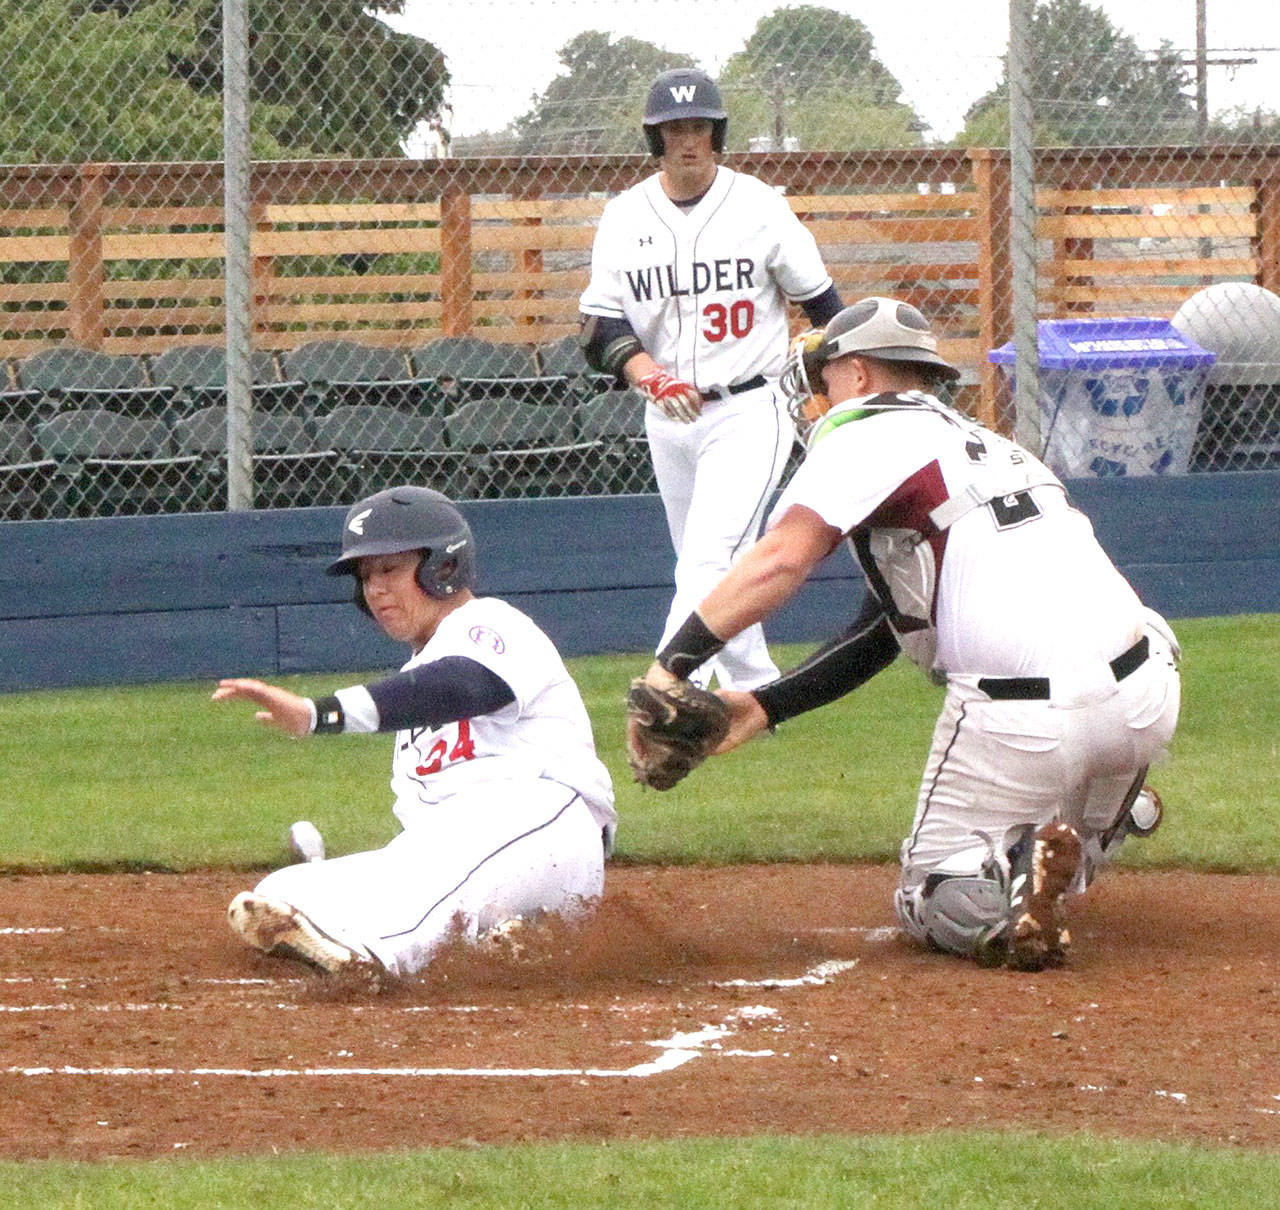 Wilder third baseman Johnnie Young is called out as he slides into home as he is tagged by NW Blaze’s Woch Wiseman. No. 30 is Wilder’s Brody Merritt. (Dave Logan/for Peninsula Daily News)